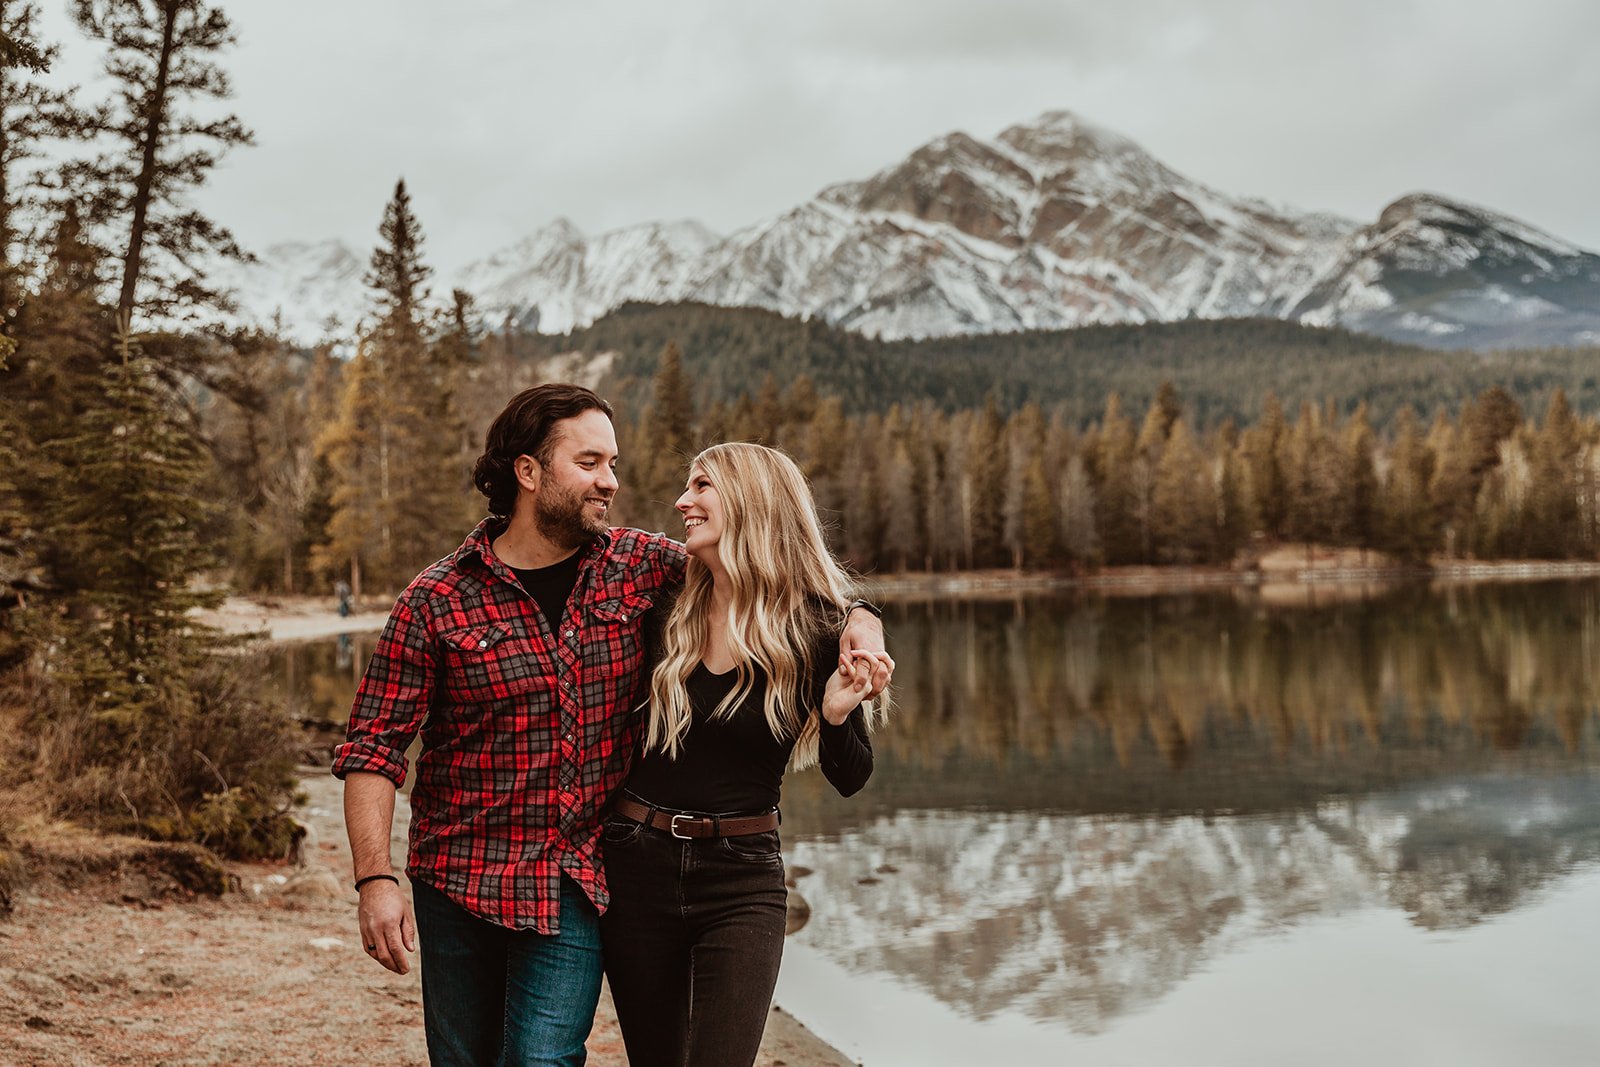 Man and woman walking on a beach with Pyramid Mountain behind them | Jamie Robson Photography | Engagement Photographer in Jasper (Copy)